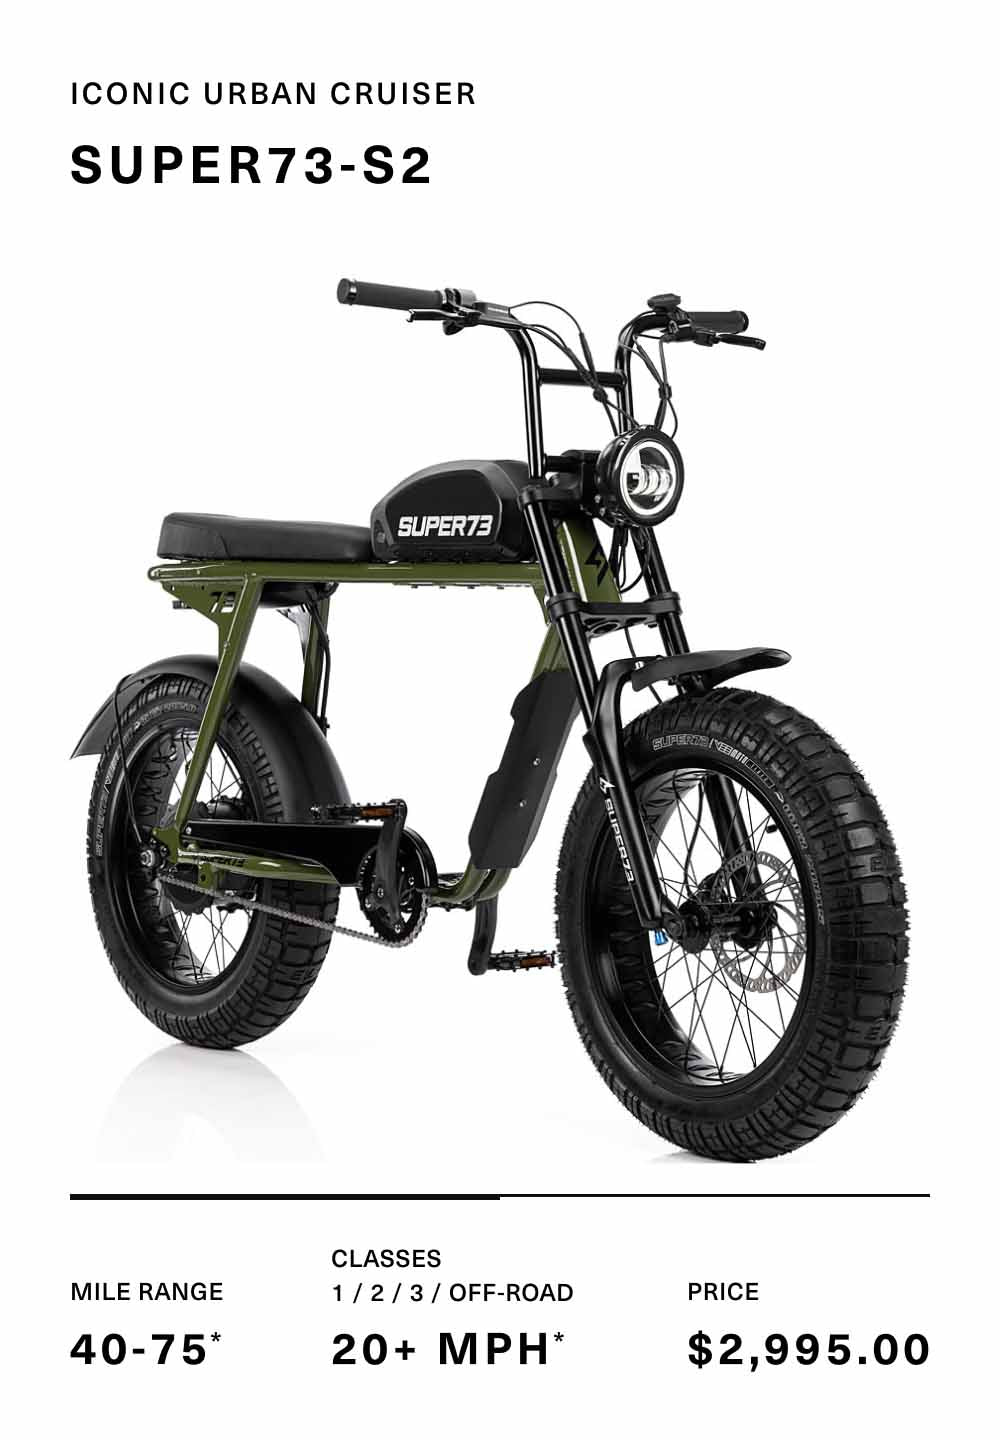 Super73 S2 Flannel Green bike specifications and pricing. Range 40-75. Classes 1,2,3,Off Road 20mph. Price $2995